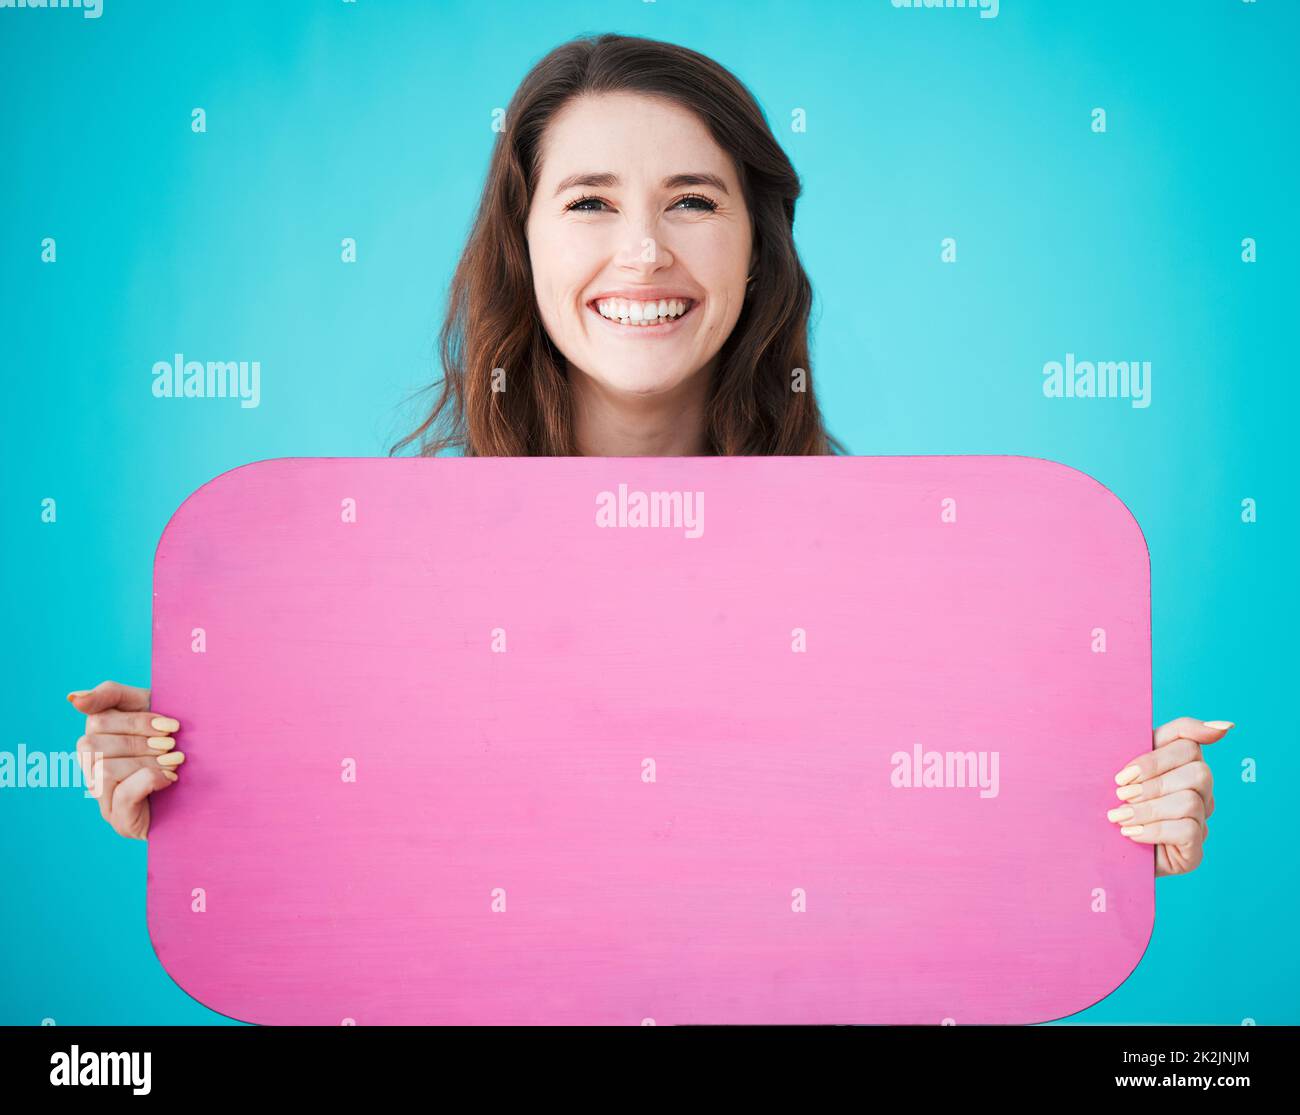 Picture your name, here. Studio portrait of an attractive young woman holding up a blank sign against a blue background. Stock Photo